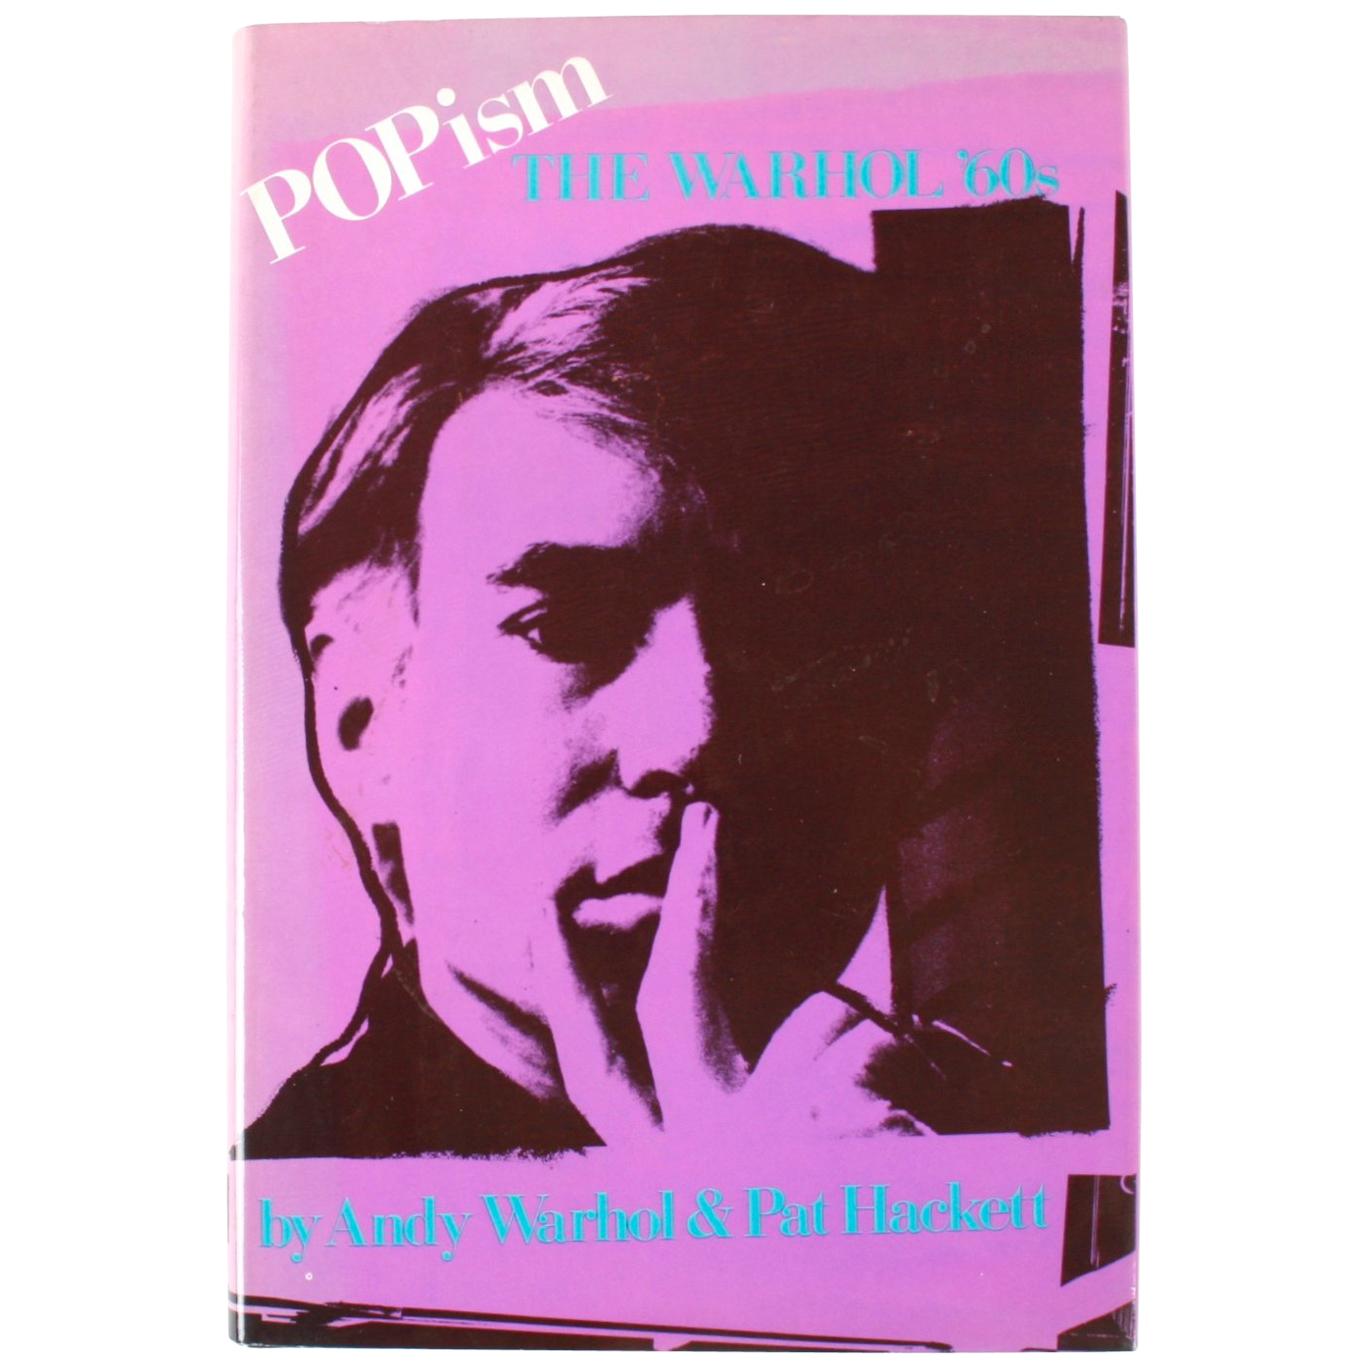 Popism: The Warhol '60s by Andy Warhol